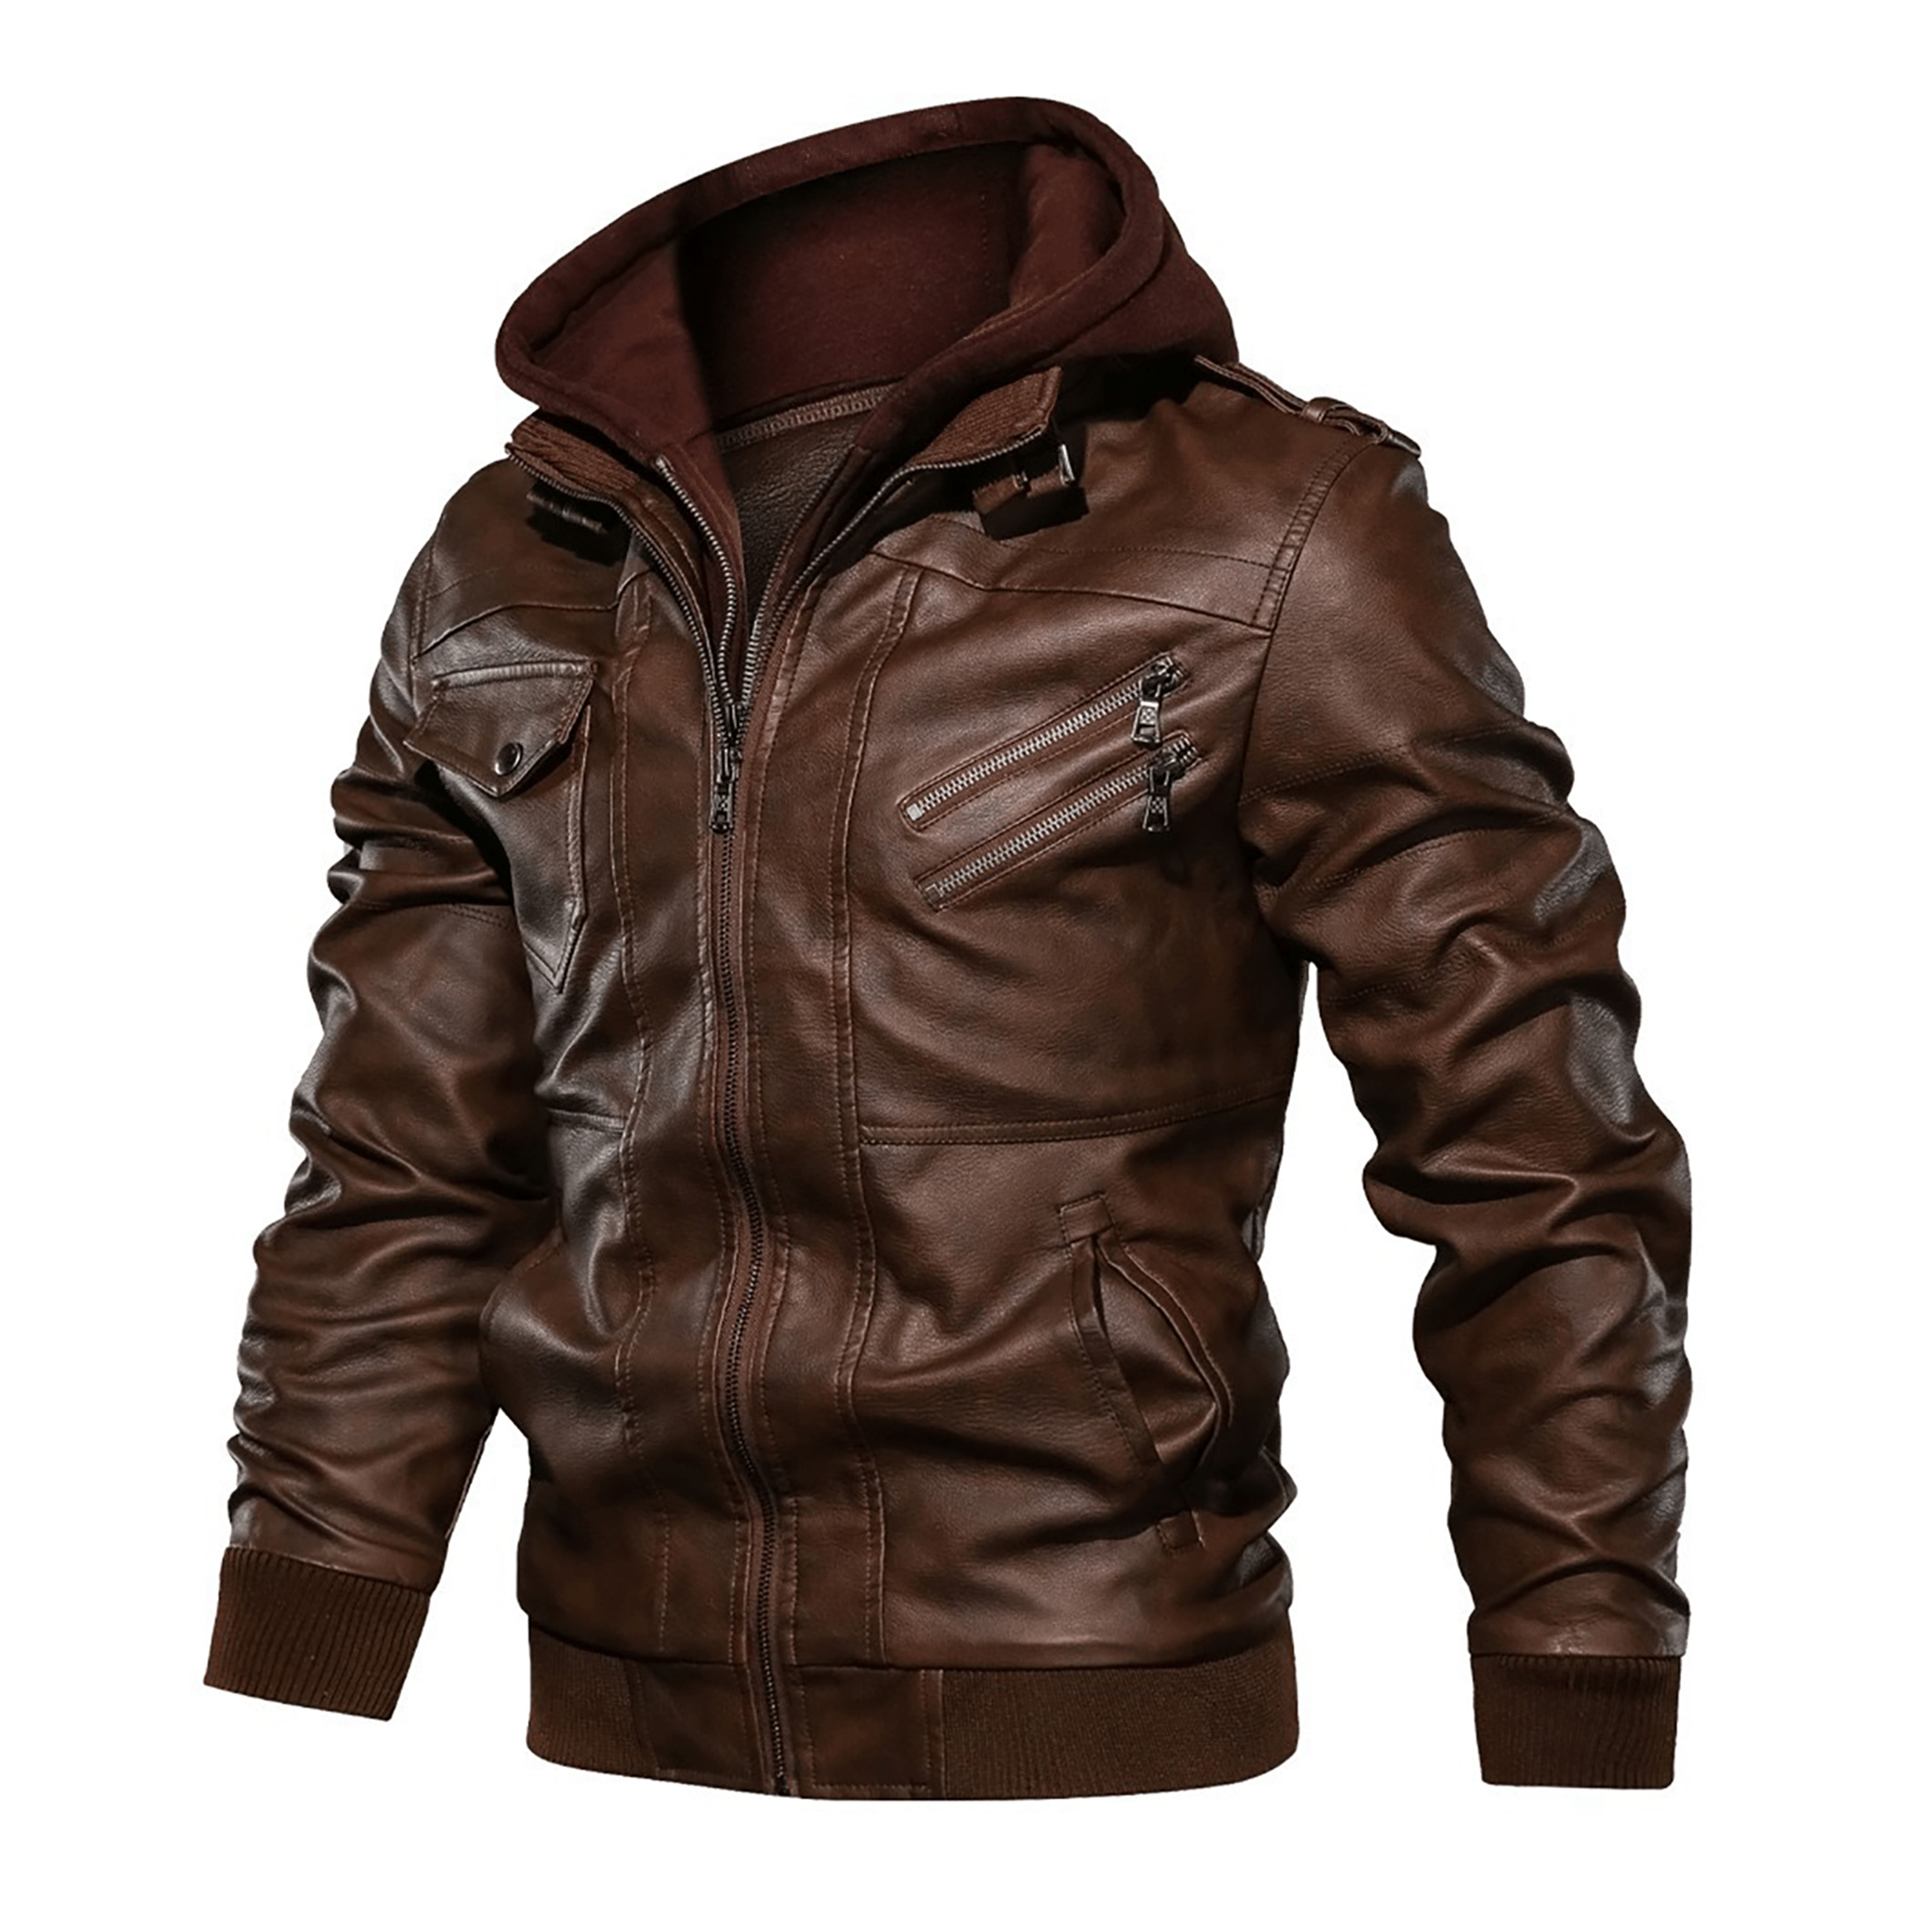 Top leather jackets and latest products 121